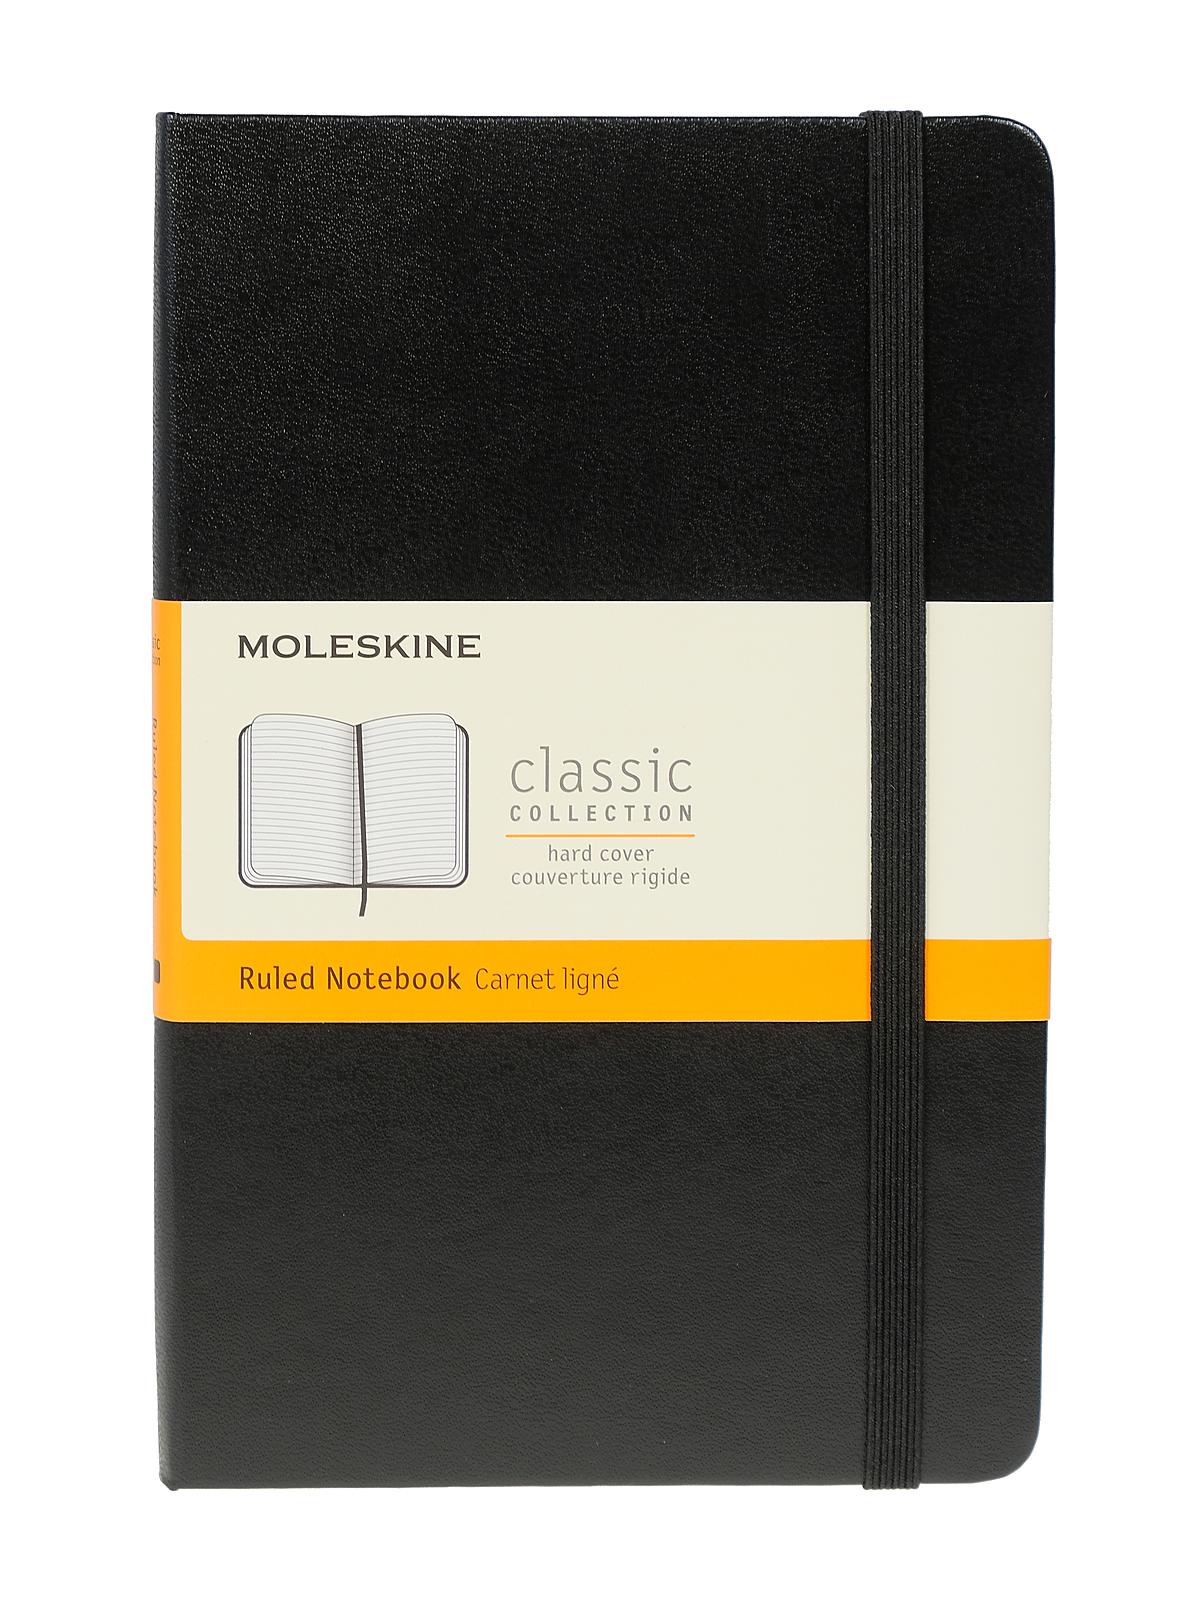 Classic Hard Cover Notebooks Black 4 1 2 In. X 7 In. 208 Pages, Lined